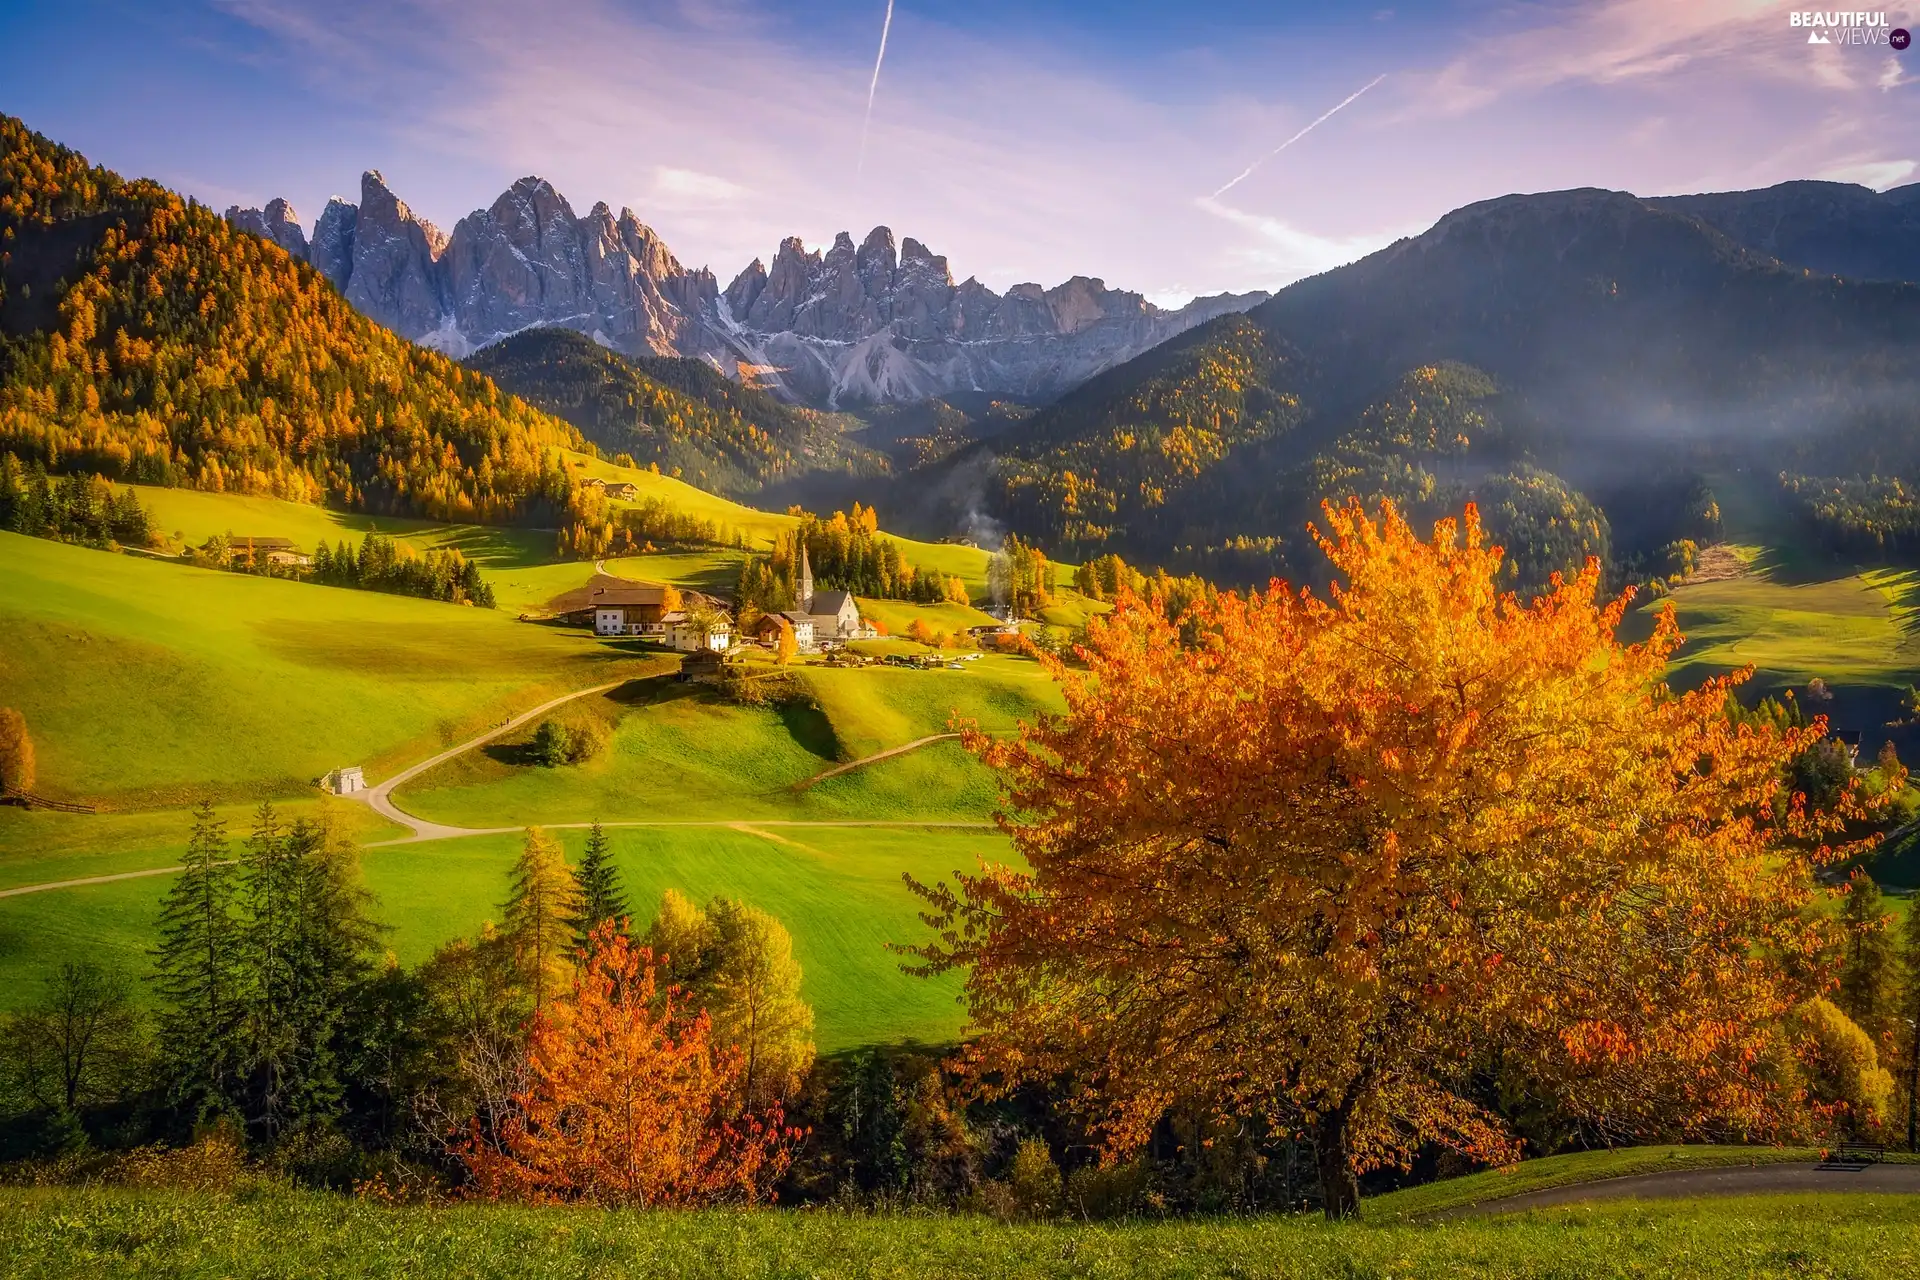 trees, woods, viewes, Mountains, Village of Santa Maddalena, Houses, autumn, Italy, Church, Massif Odle, Val di Funes Valley, Dolomites